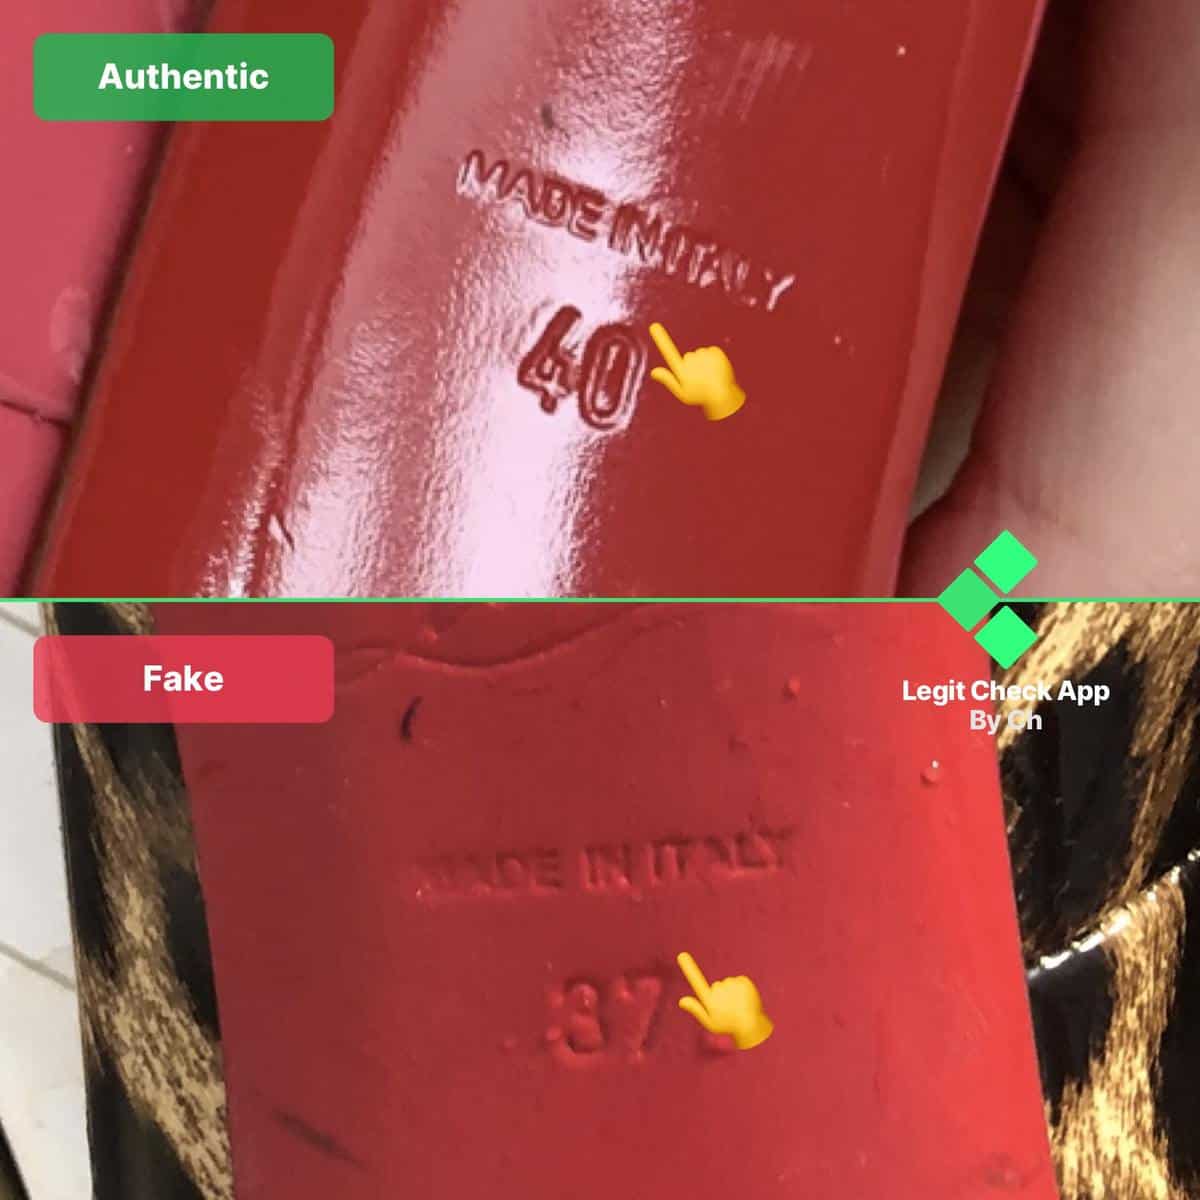 Christain Louboutin red bottom spikes with authentic verification